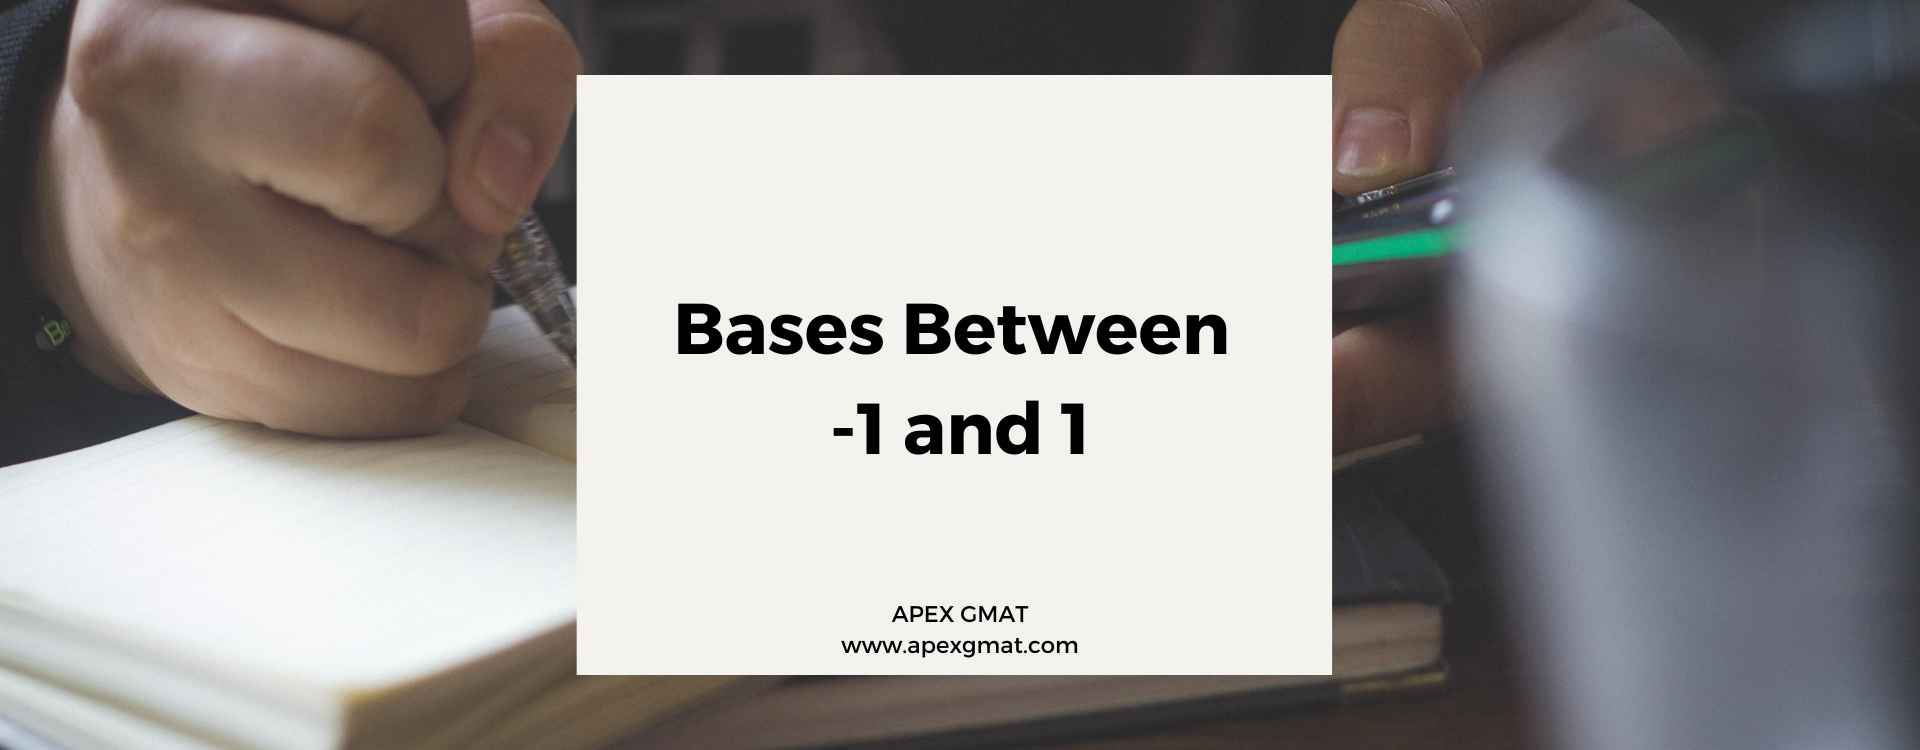 Bases Between -1 and 1